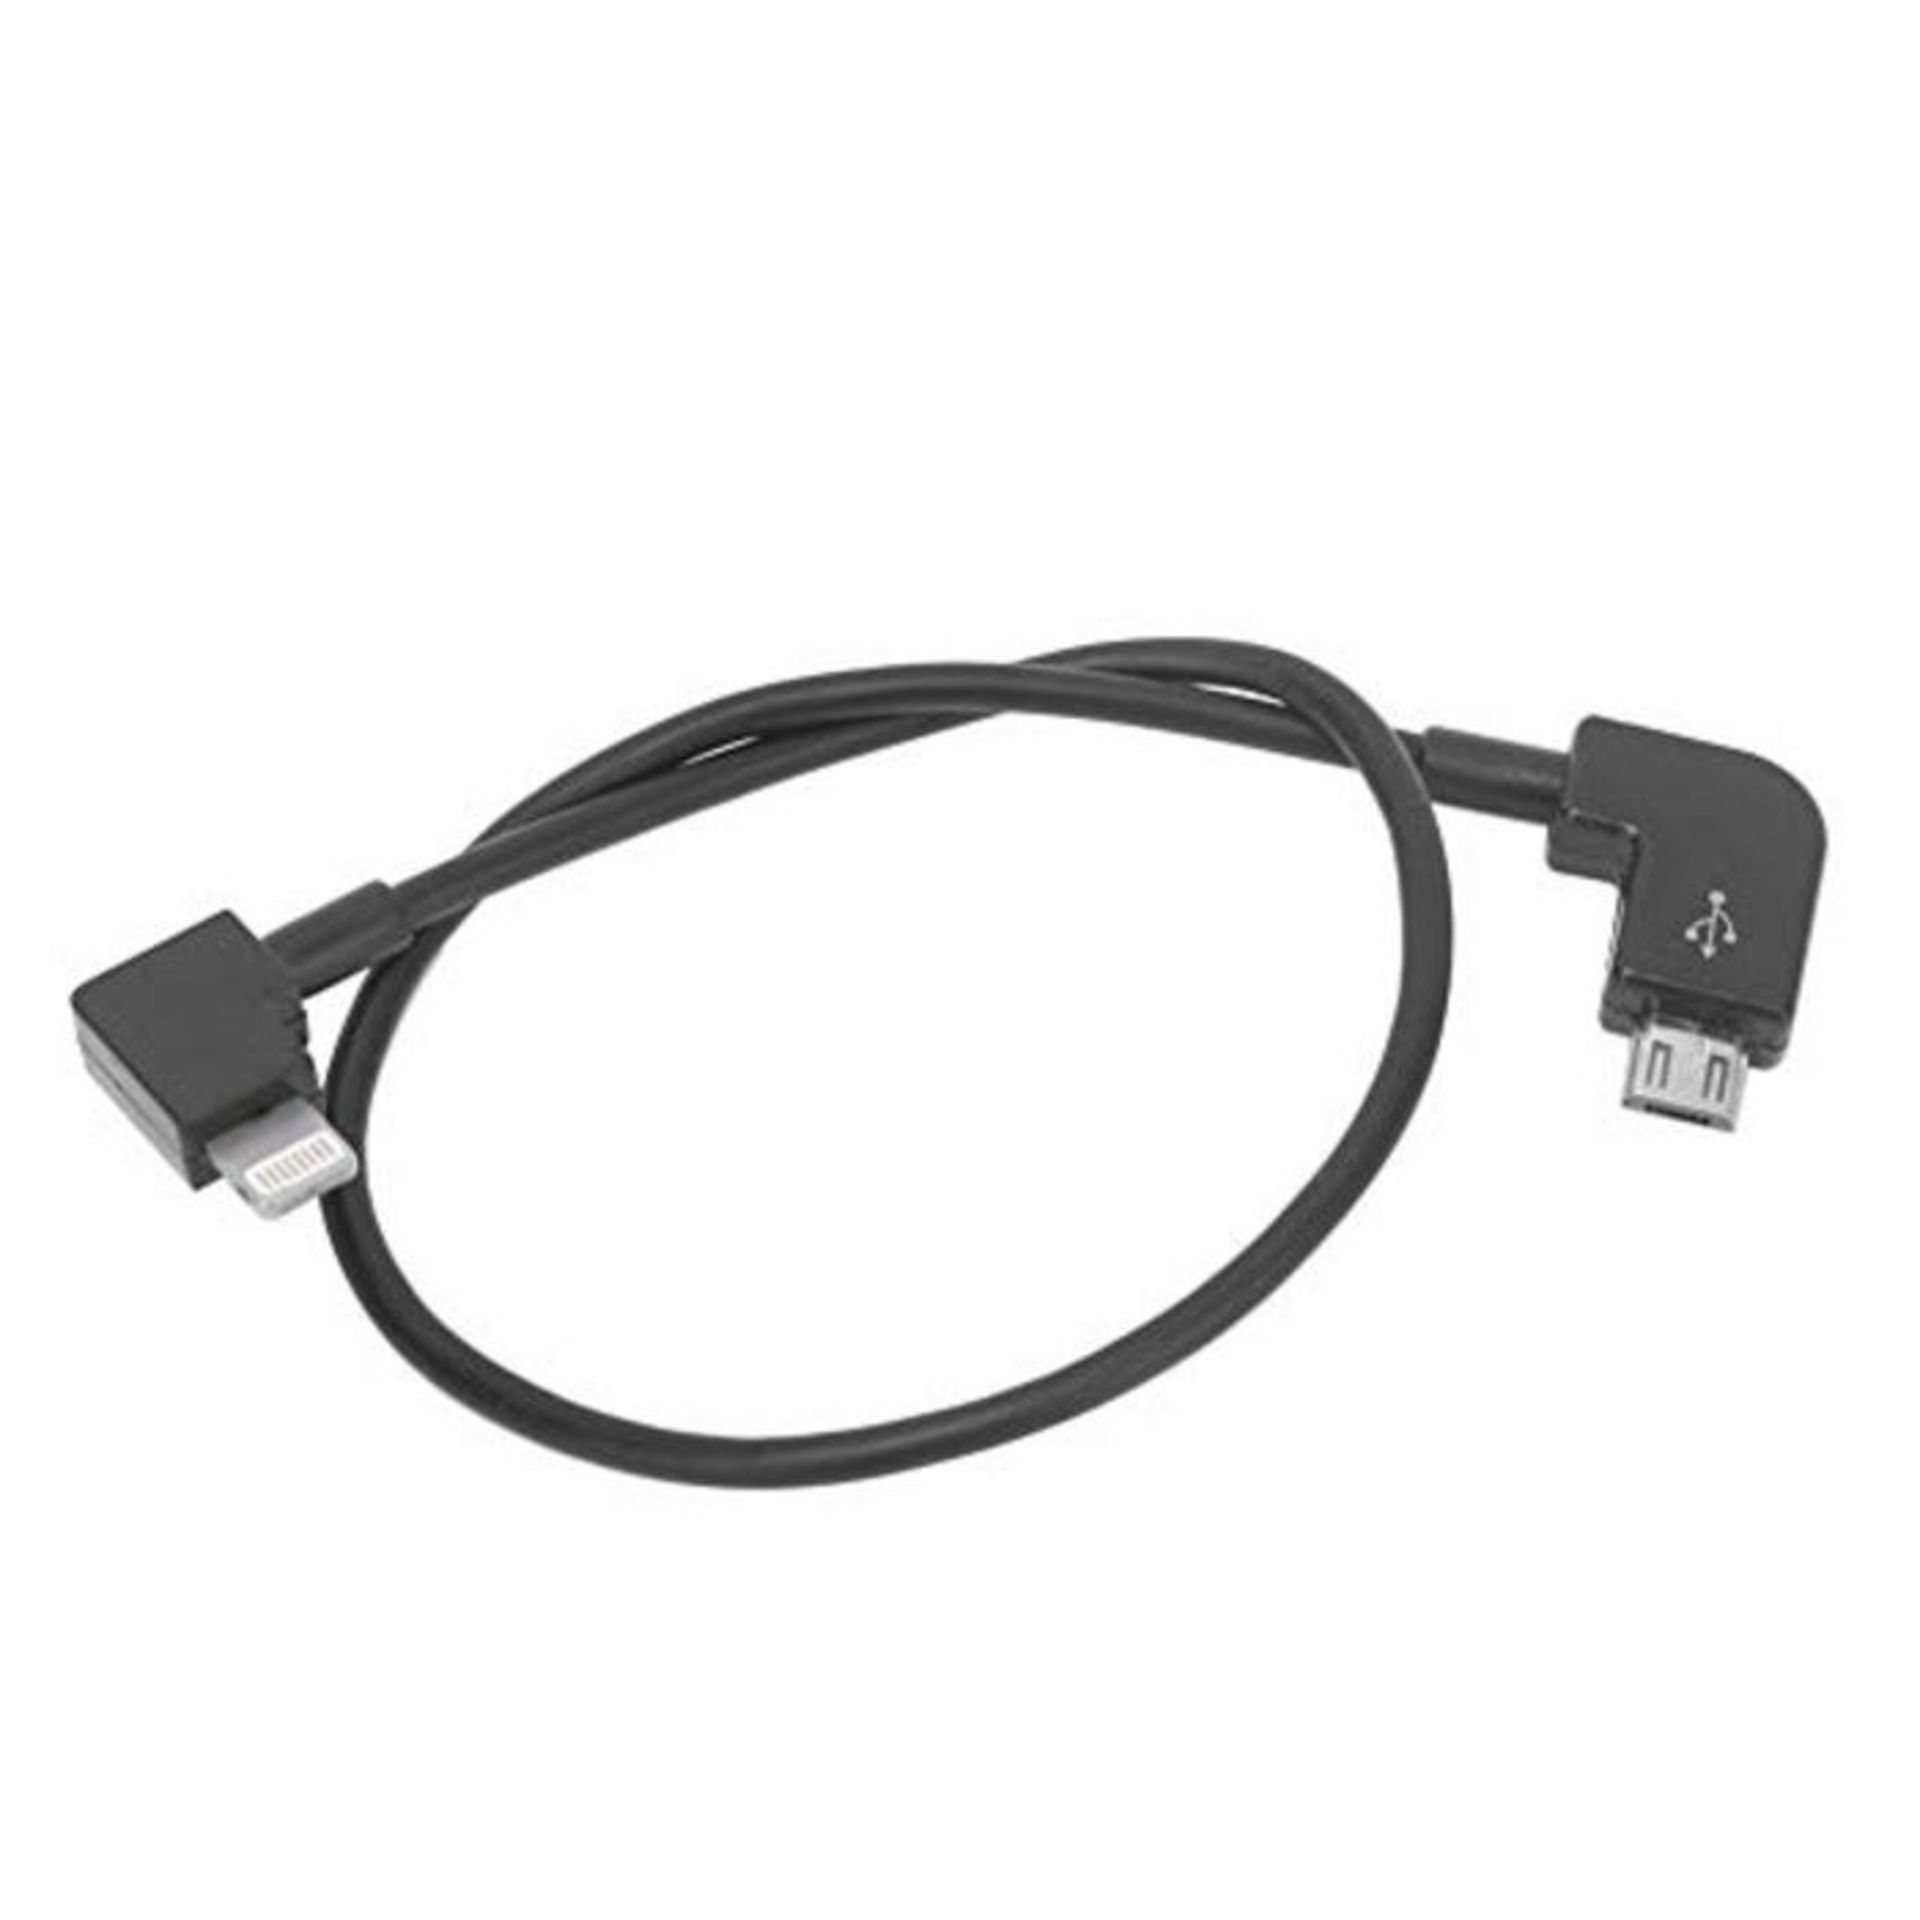 Dilwe Micro USB Cable, RC Micro USB Cable Replacement Accessory Compatible with MAVIC